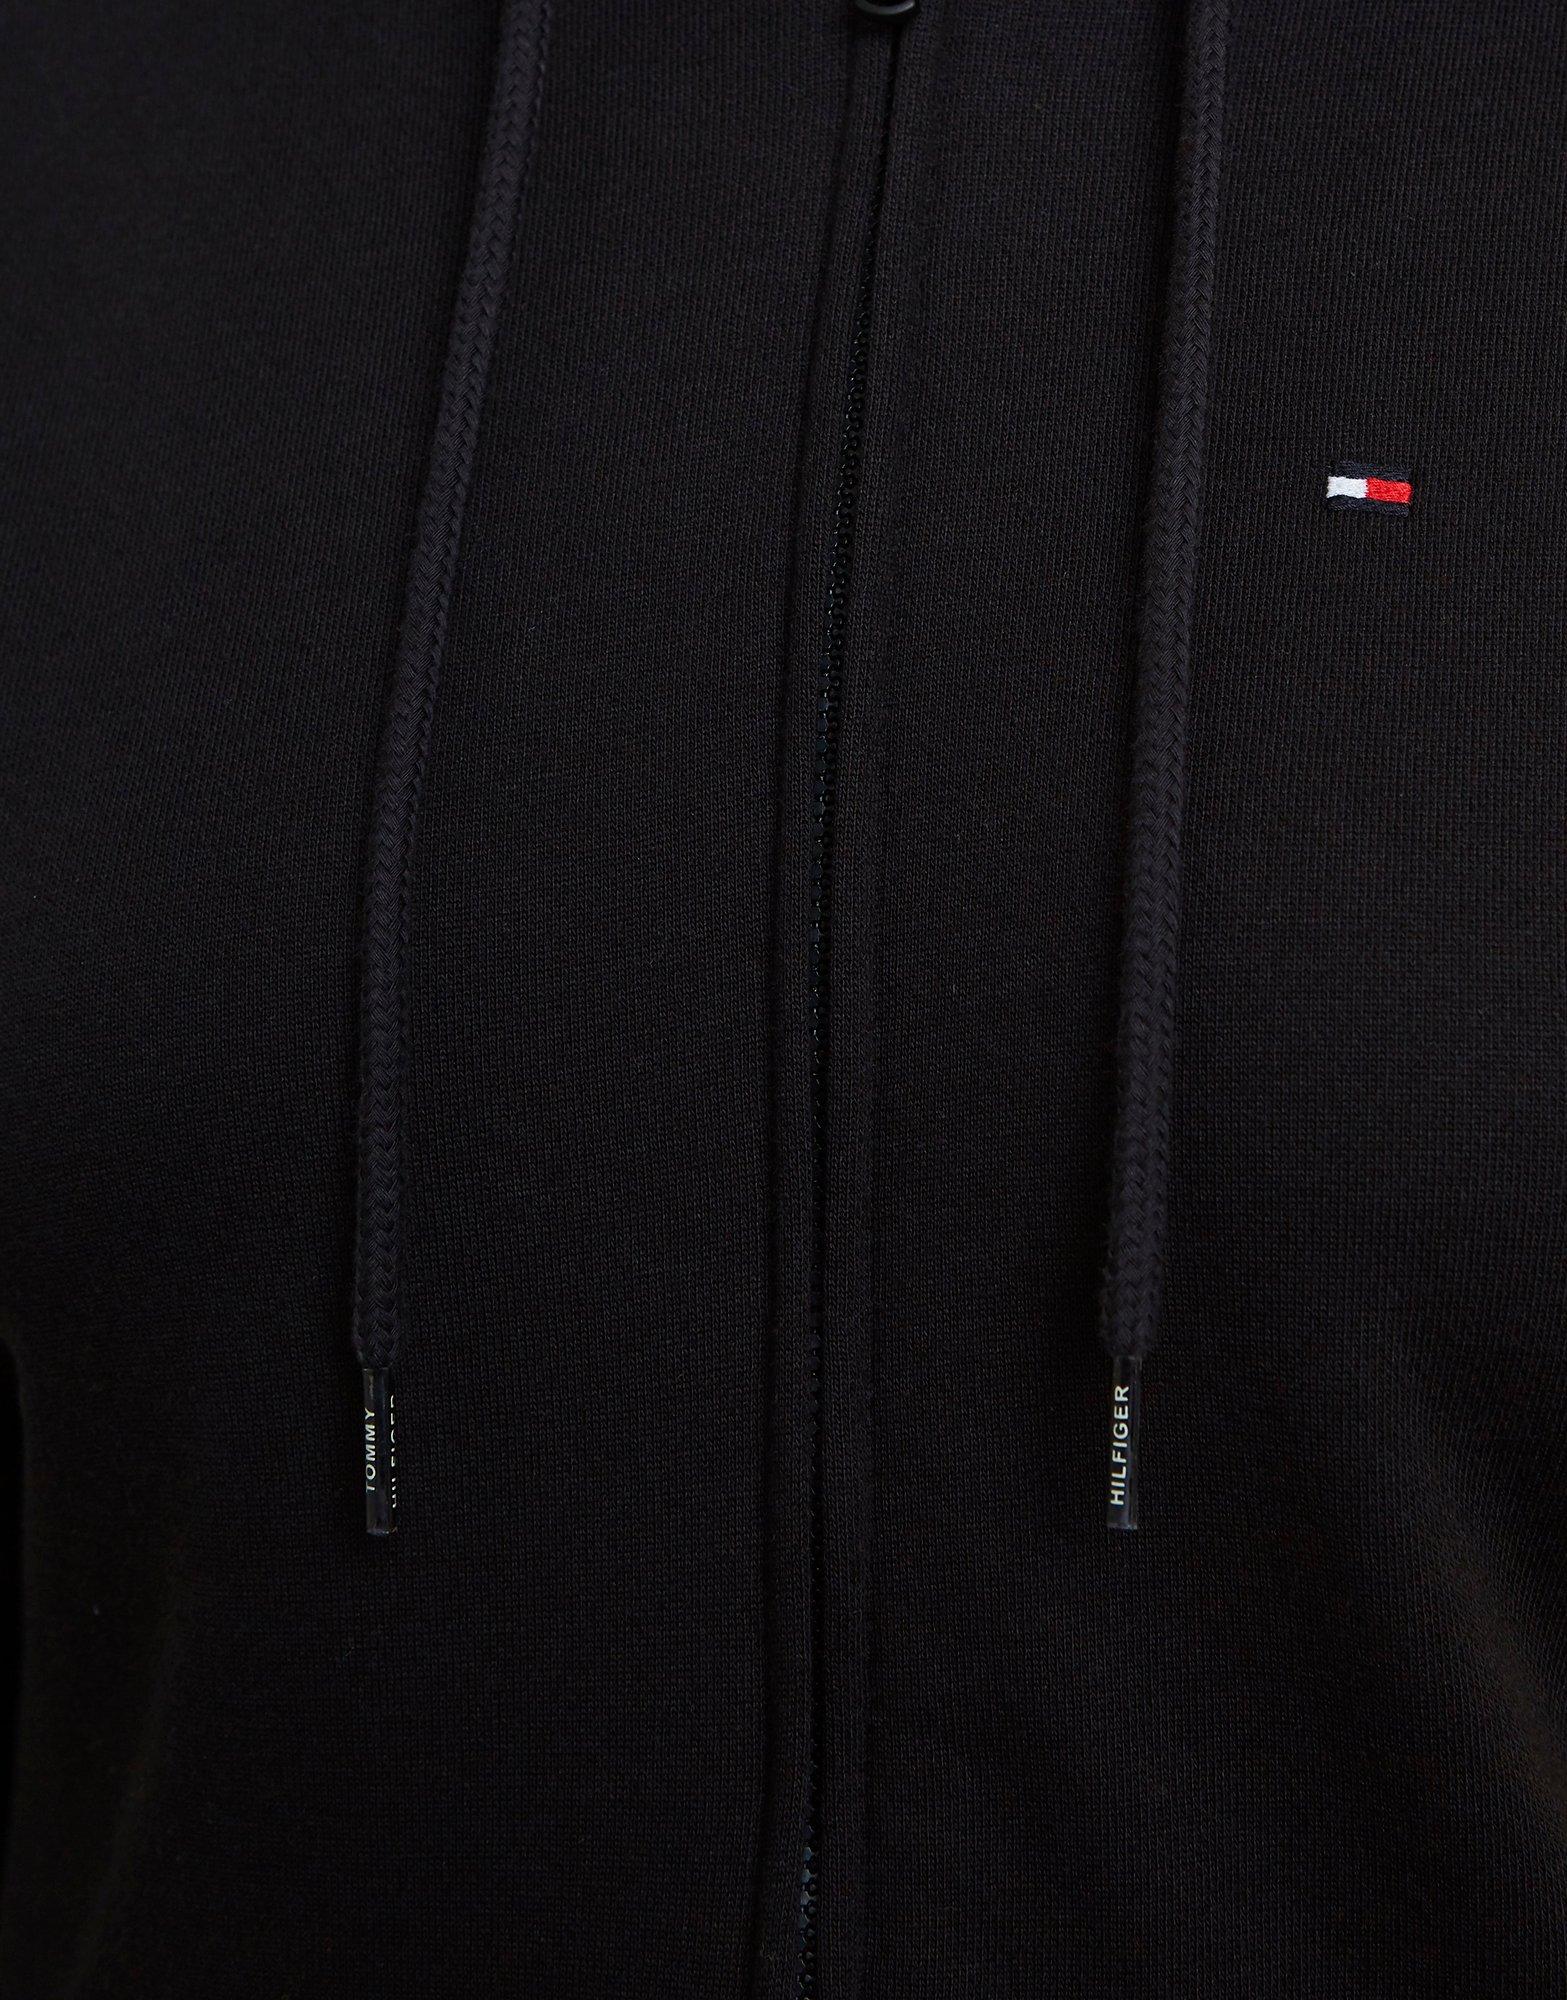 tommy hilfiger tape hooded top